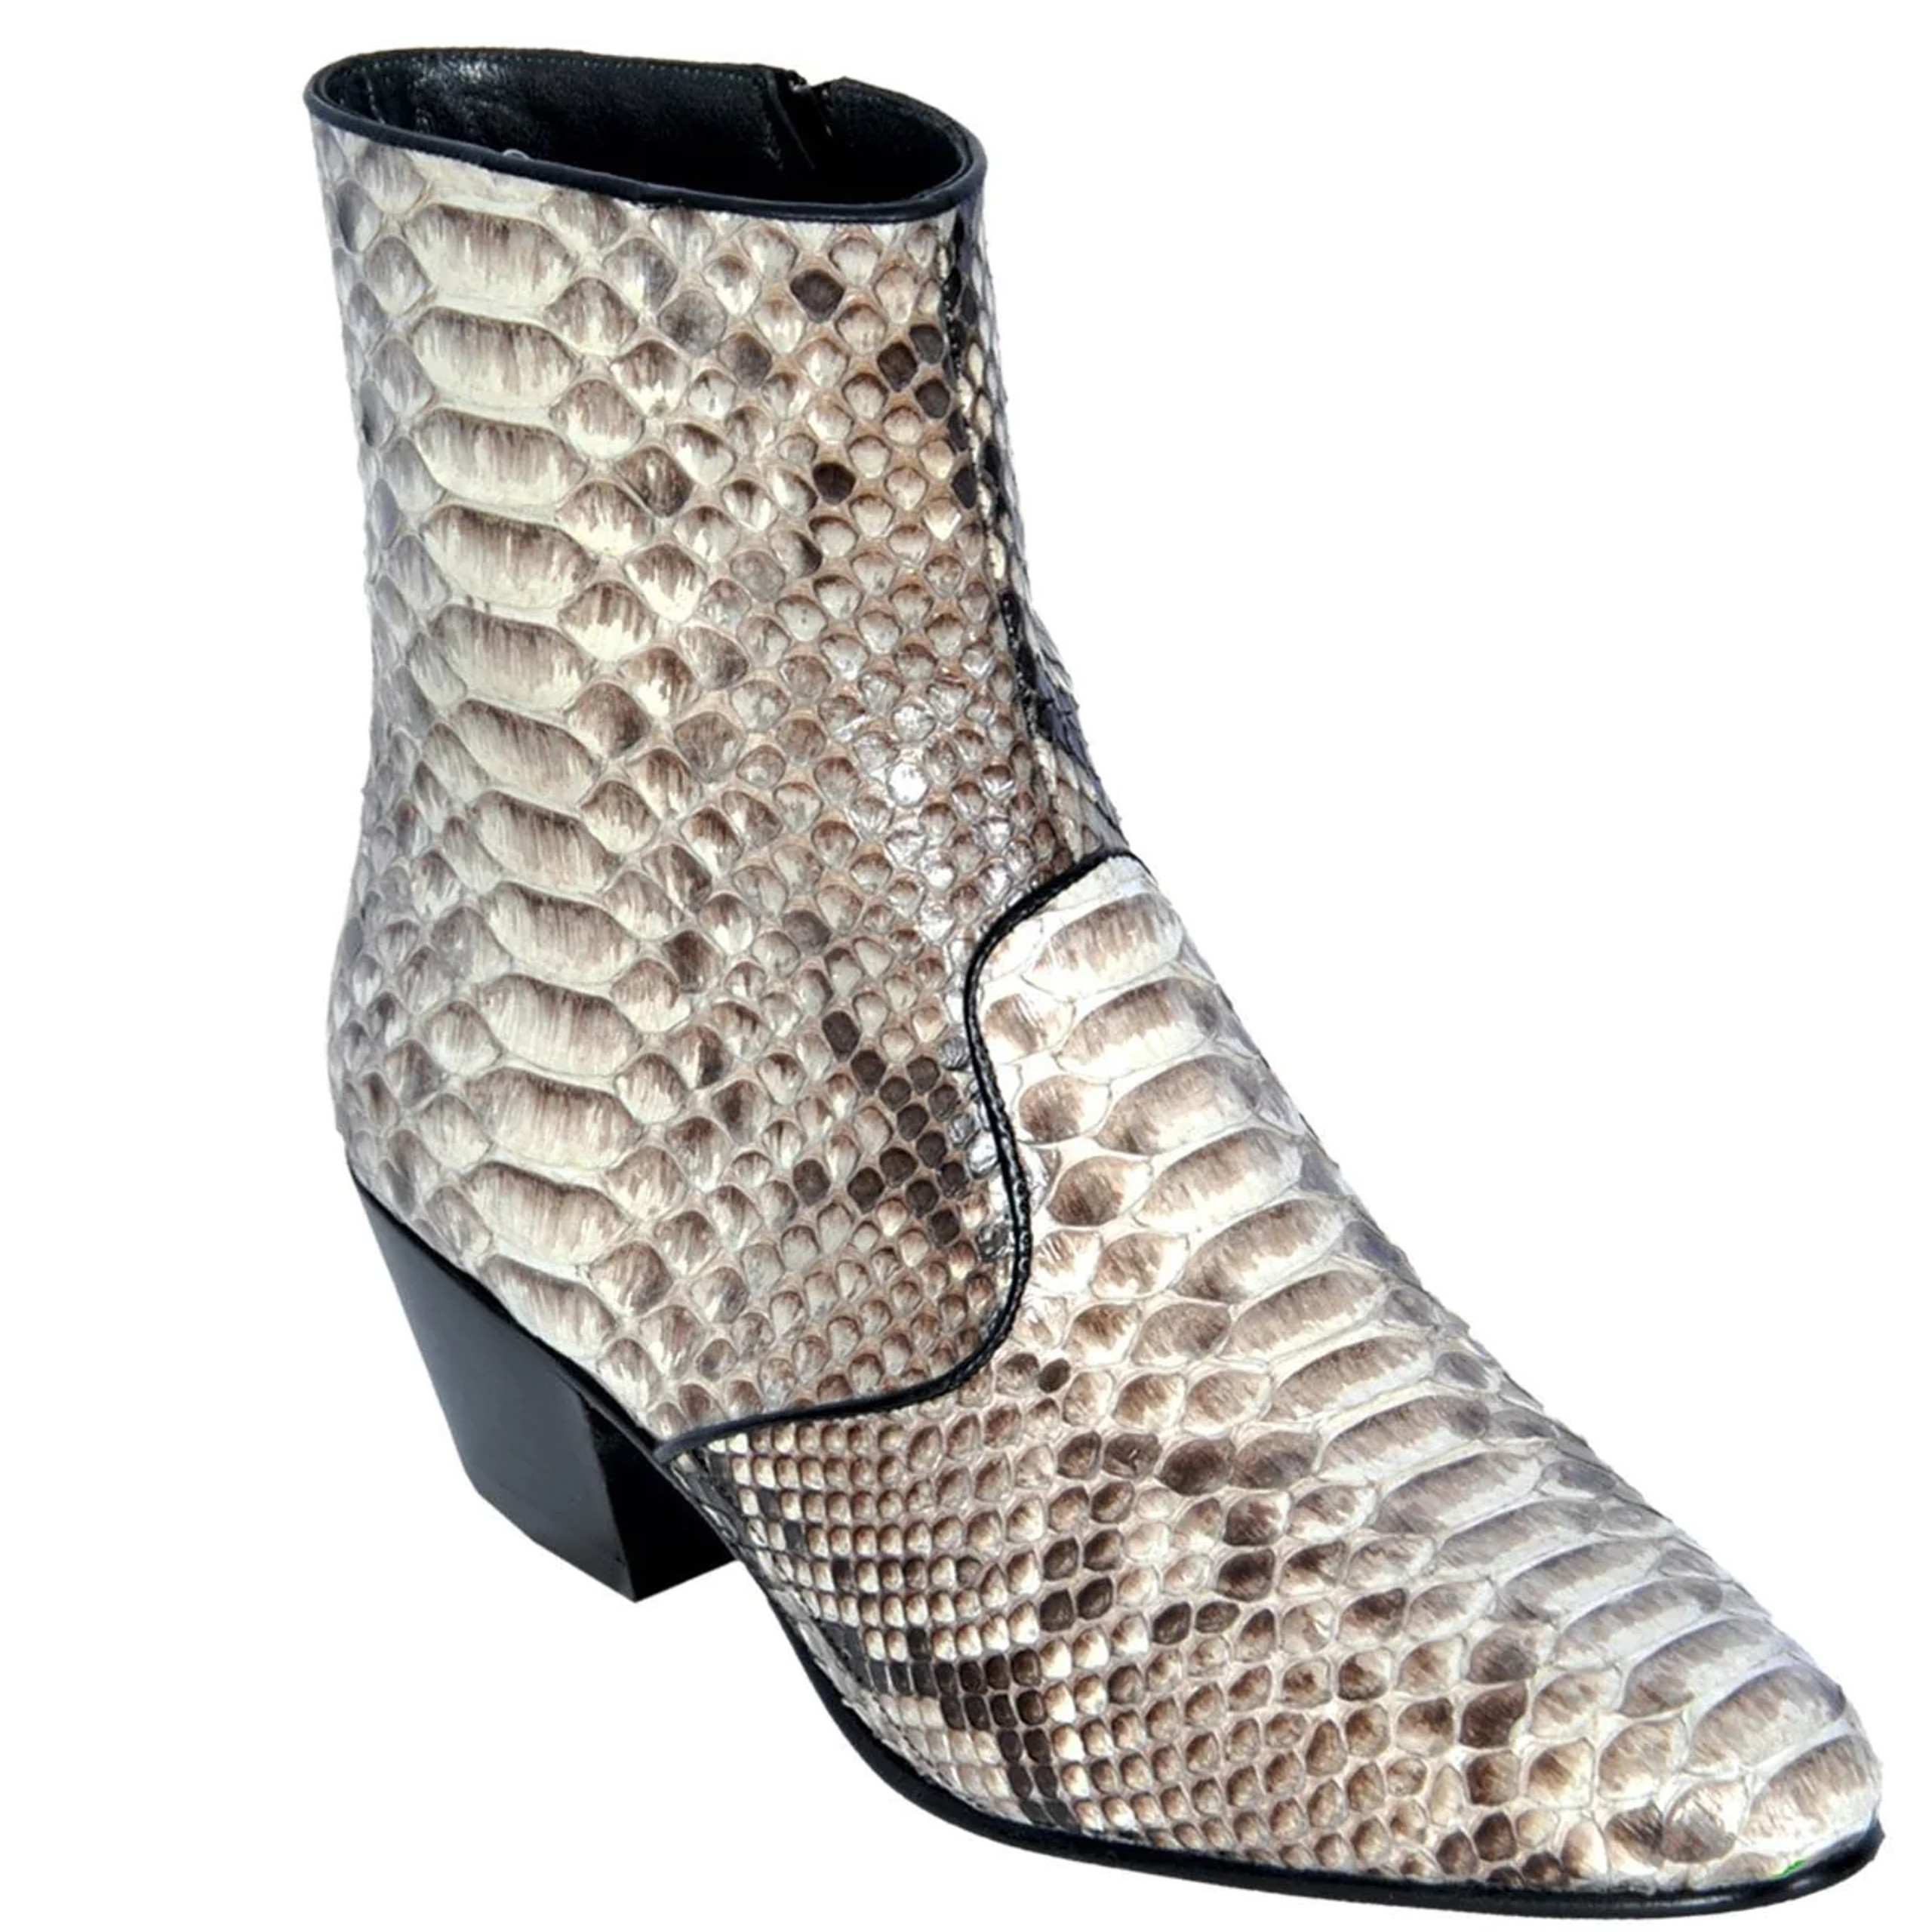 Shop Boots - Snakeskin Boots - Python Boots - Page 1 - Tim's Boots